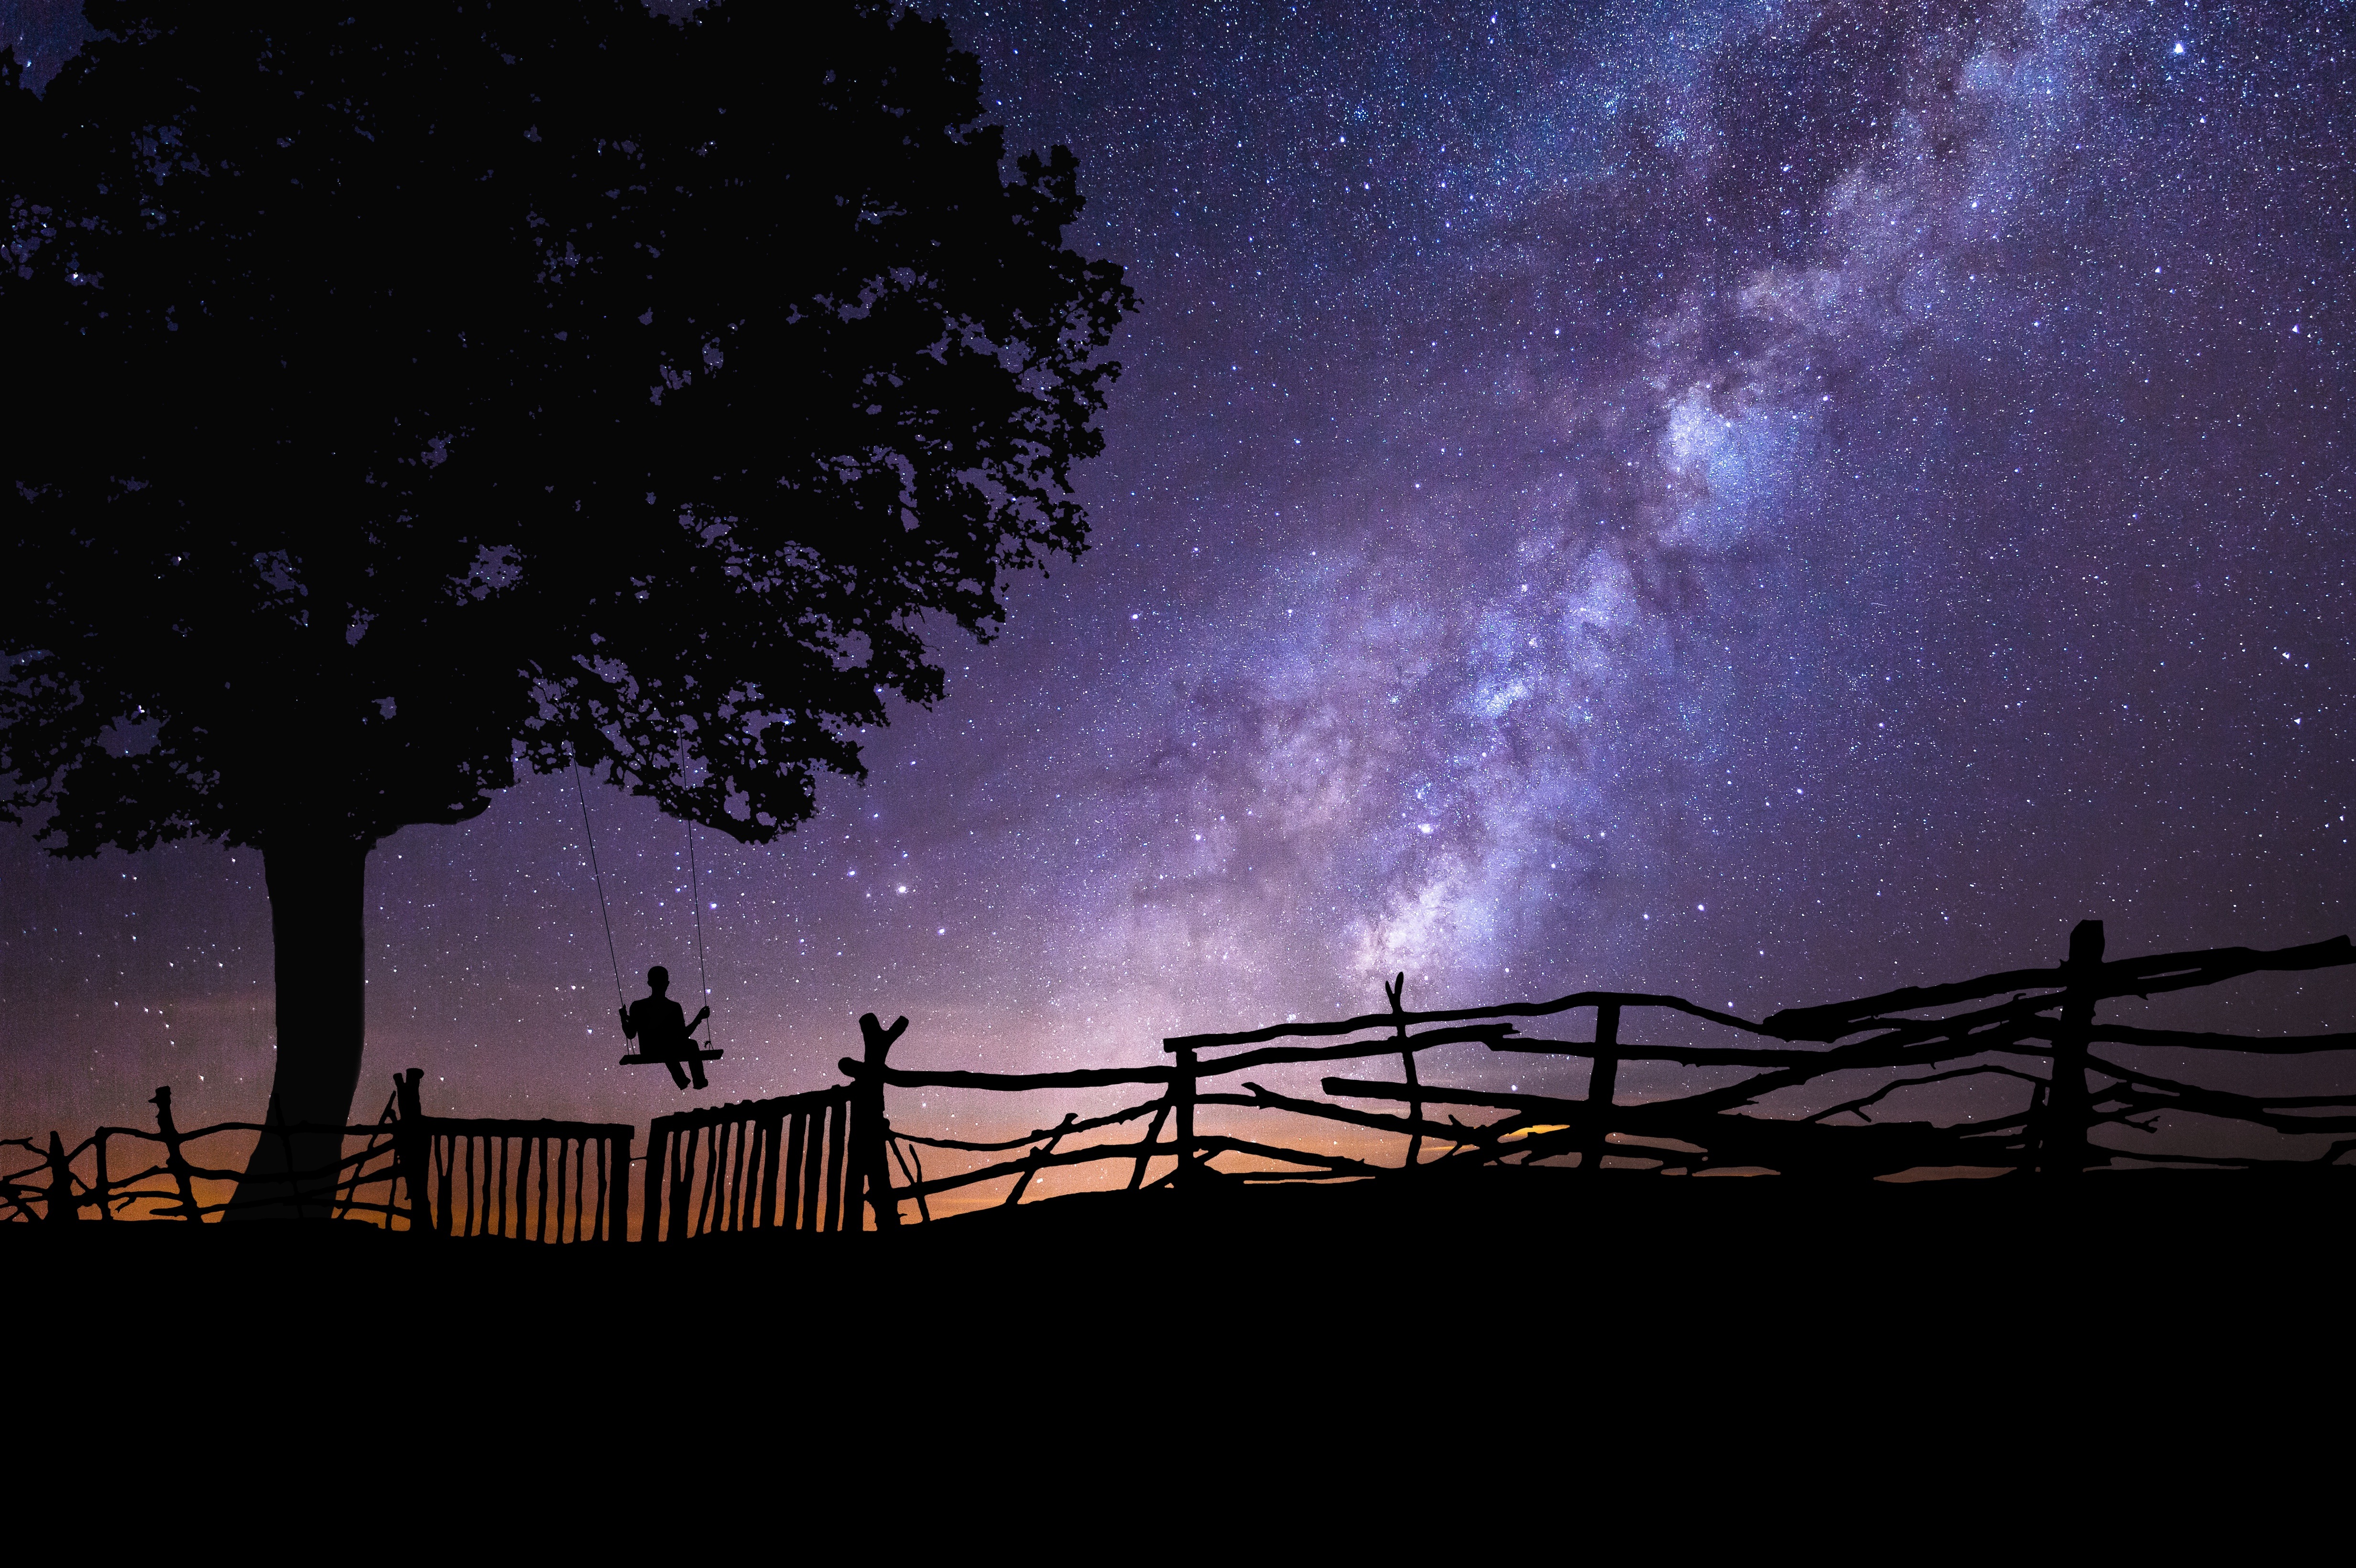 109636 download wallpaper dark, night, silhouette, wood, tree, starry sky, swing screensavers and pictures for free